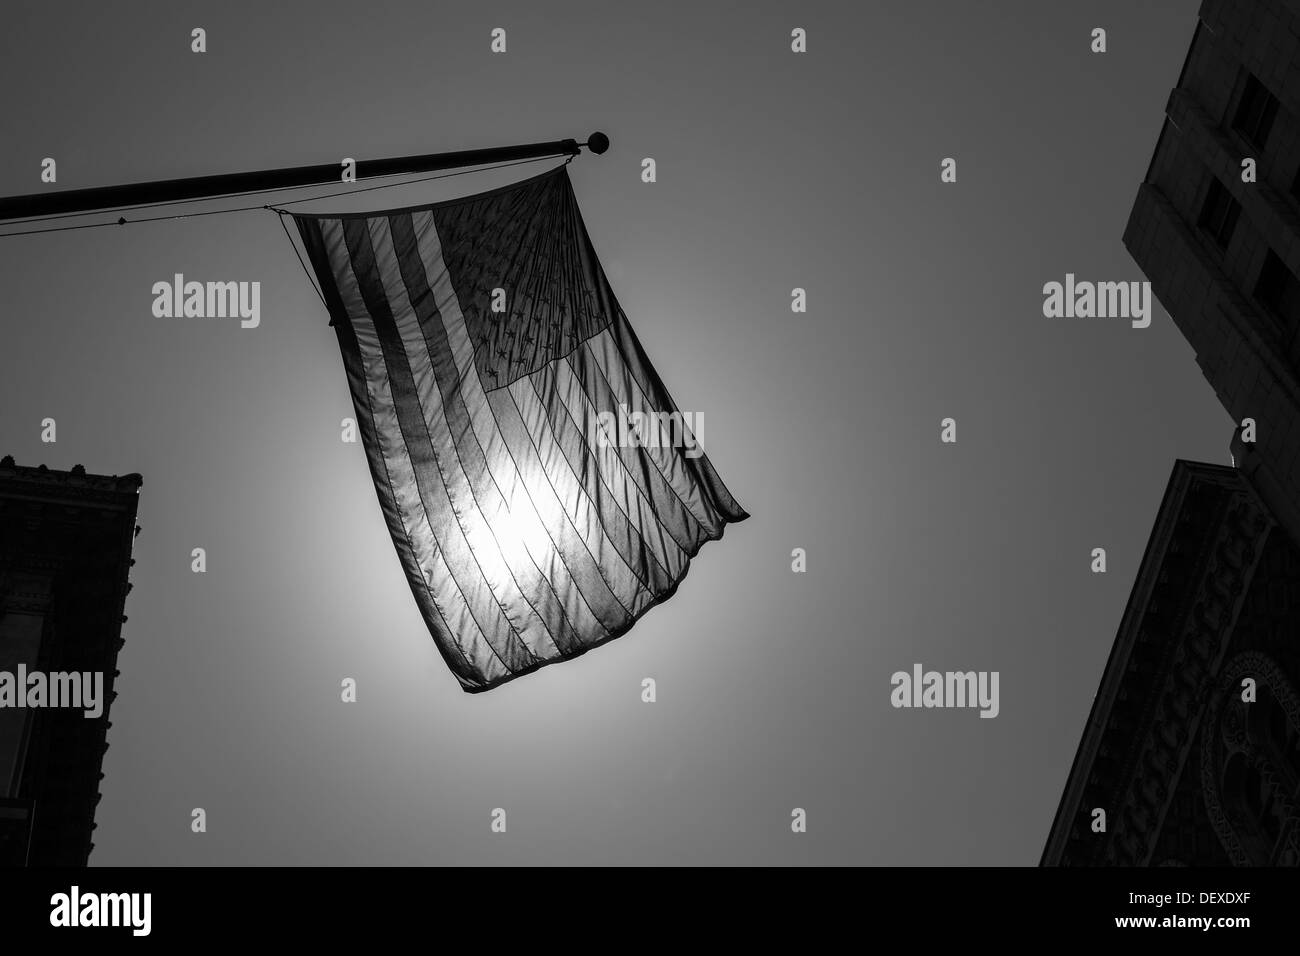 US american symbol flag over Black and white city urban shapes Stock Photo